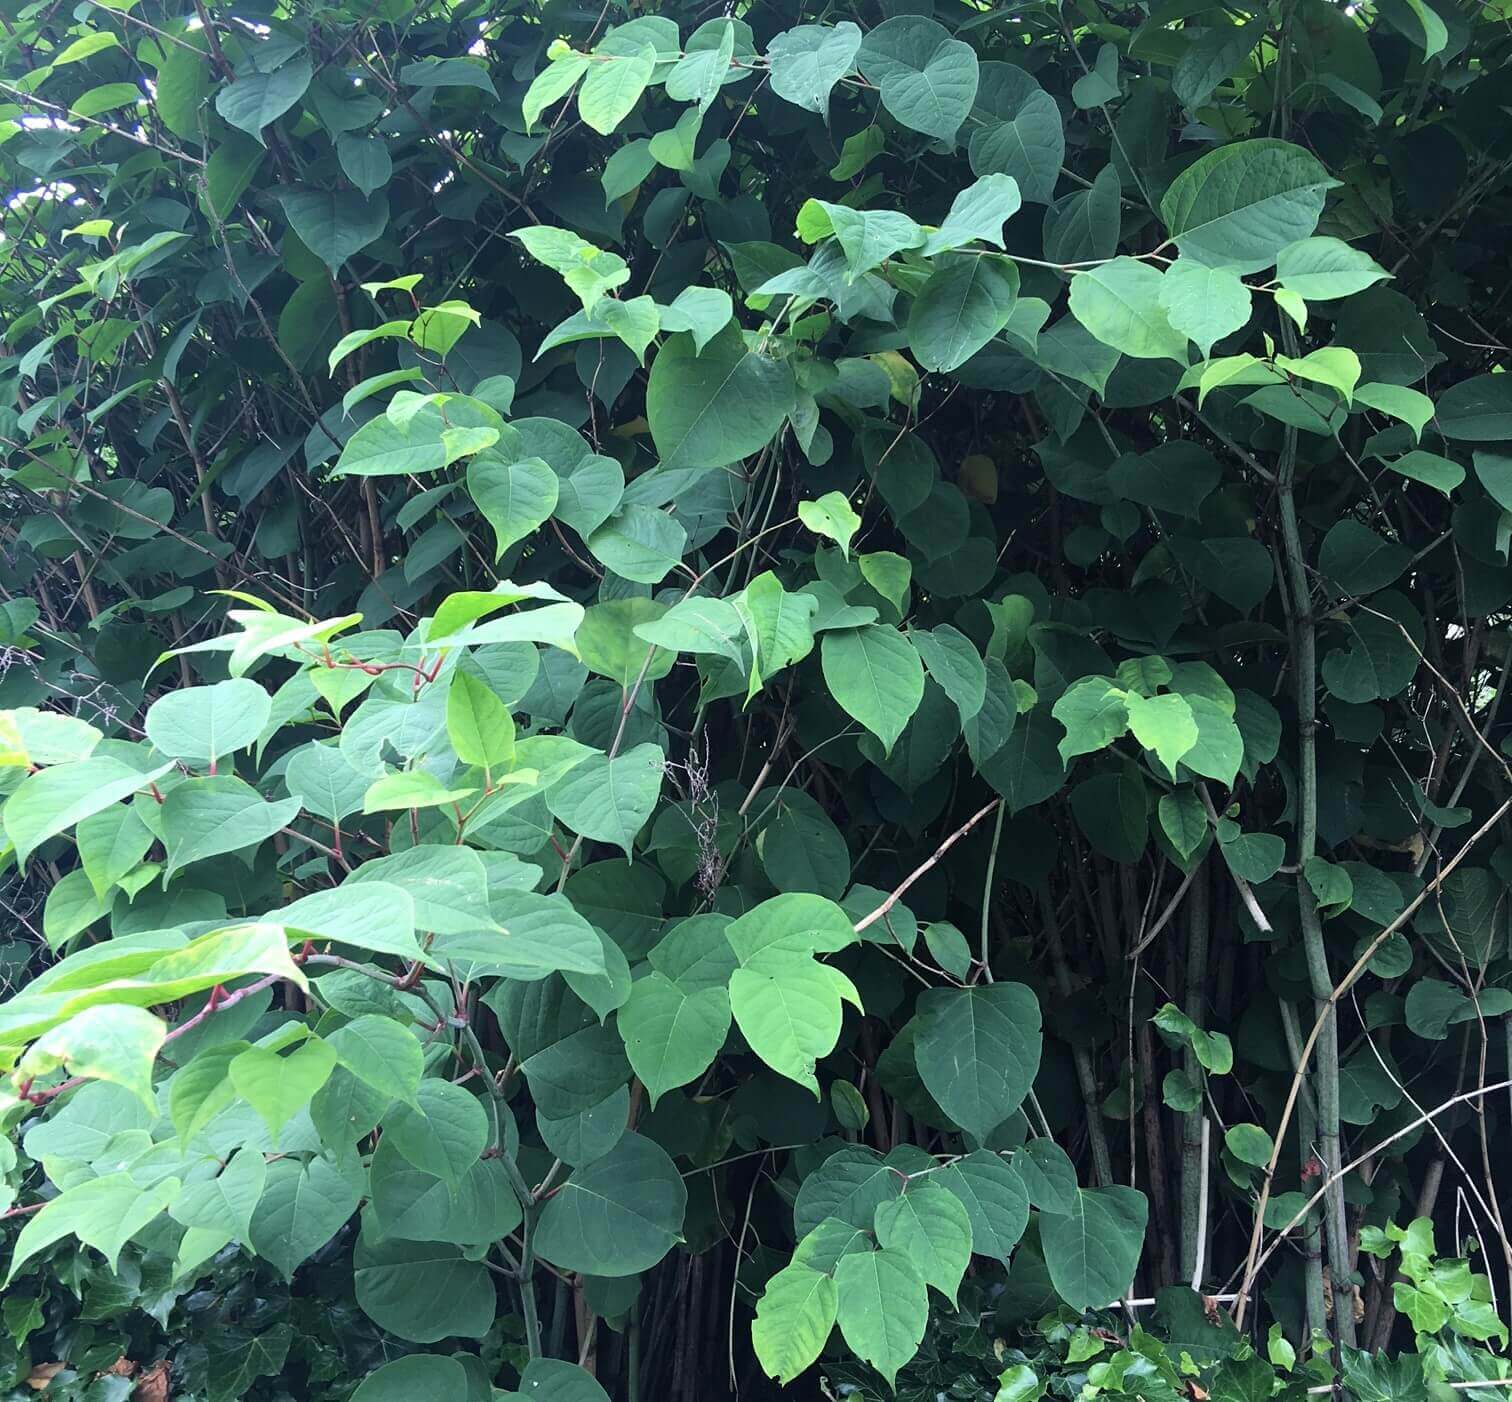 Removal of Japanese Knotweed in Staveley